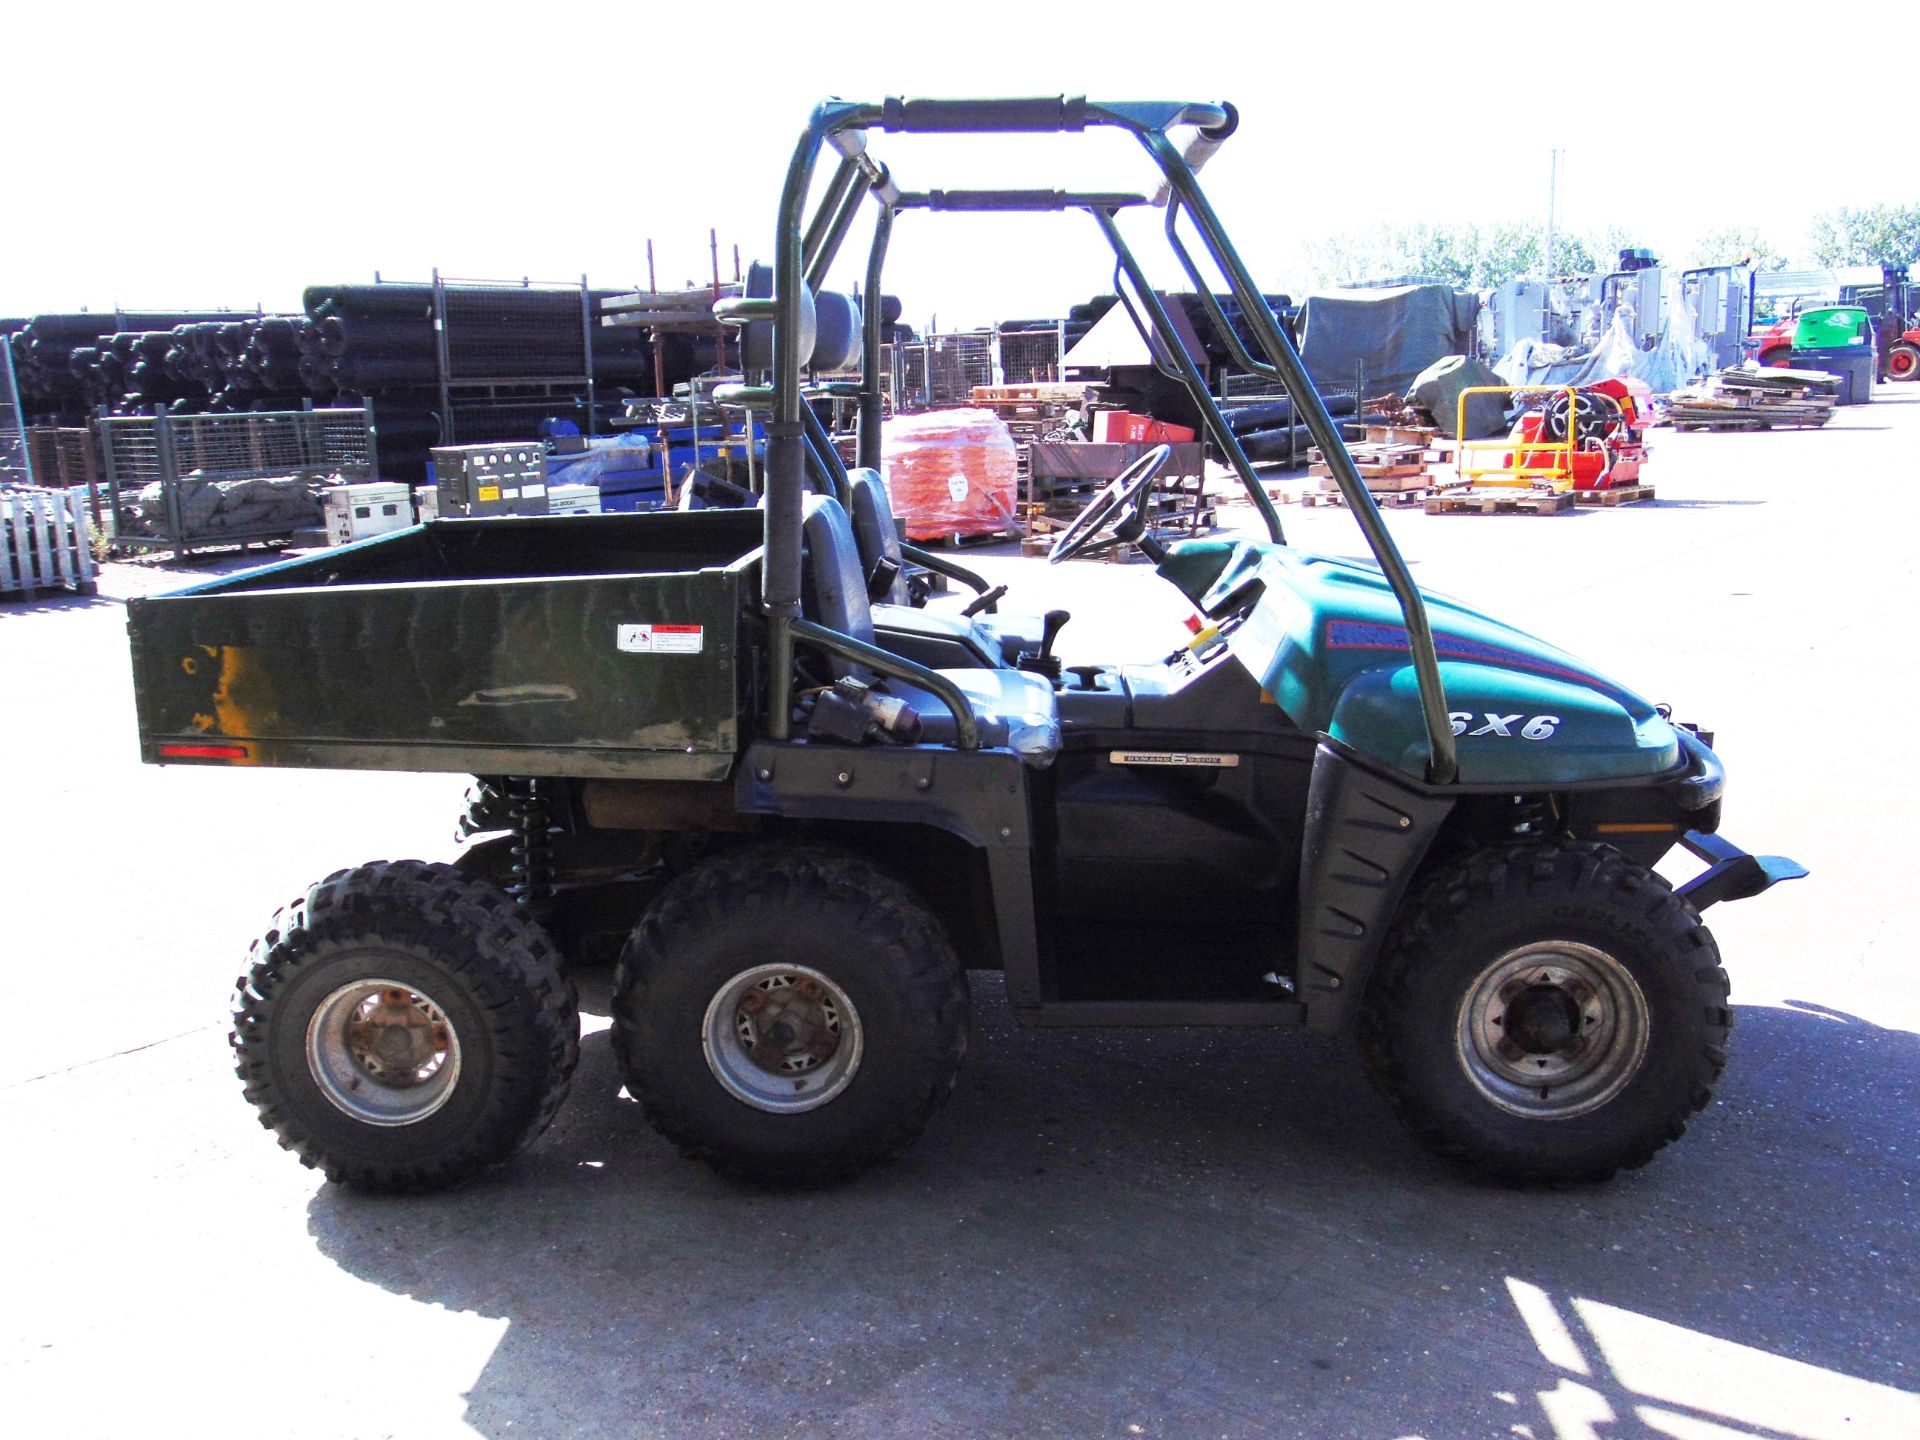 Polaris 6x6 Ranger Utility Vehicle Only 226 Hours! From National Grid. - Image 5 of 27